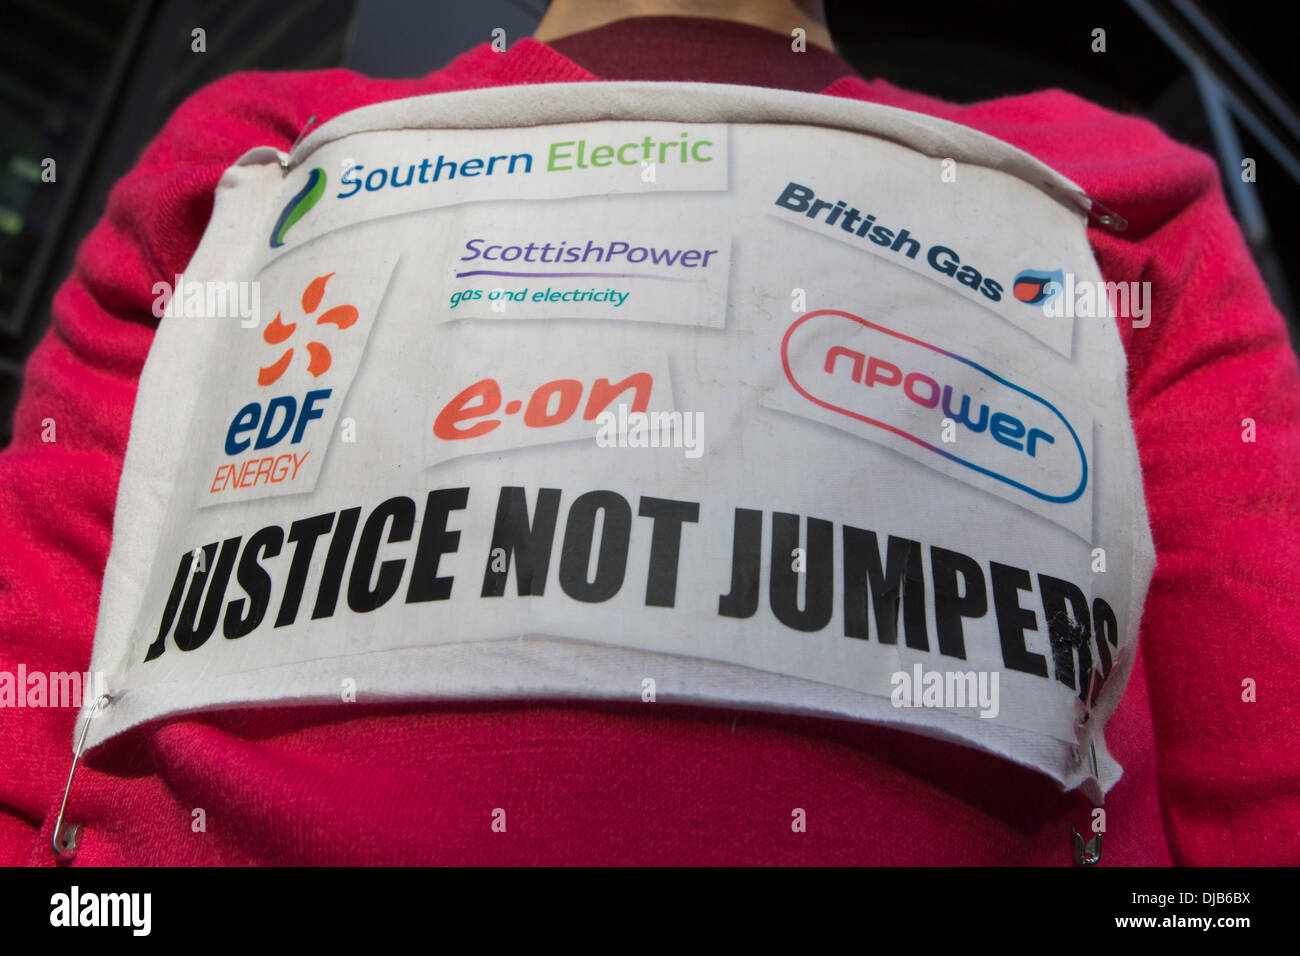 London, UK. 26 November 2013. Picture: a protester wears a 'Justice not Jumpers' sign. Protesters gathered in the City of London to demonstrate against the Government's fuel policy for pensioners and the price hikes of the Bix Six energy companies (Southern Electric, British Gas, EDF, Electricité de France, E.ON, Scottish Power, RWE npower). Photo: Nick Savage/Alamy Live News Stock Photo